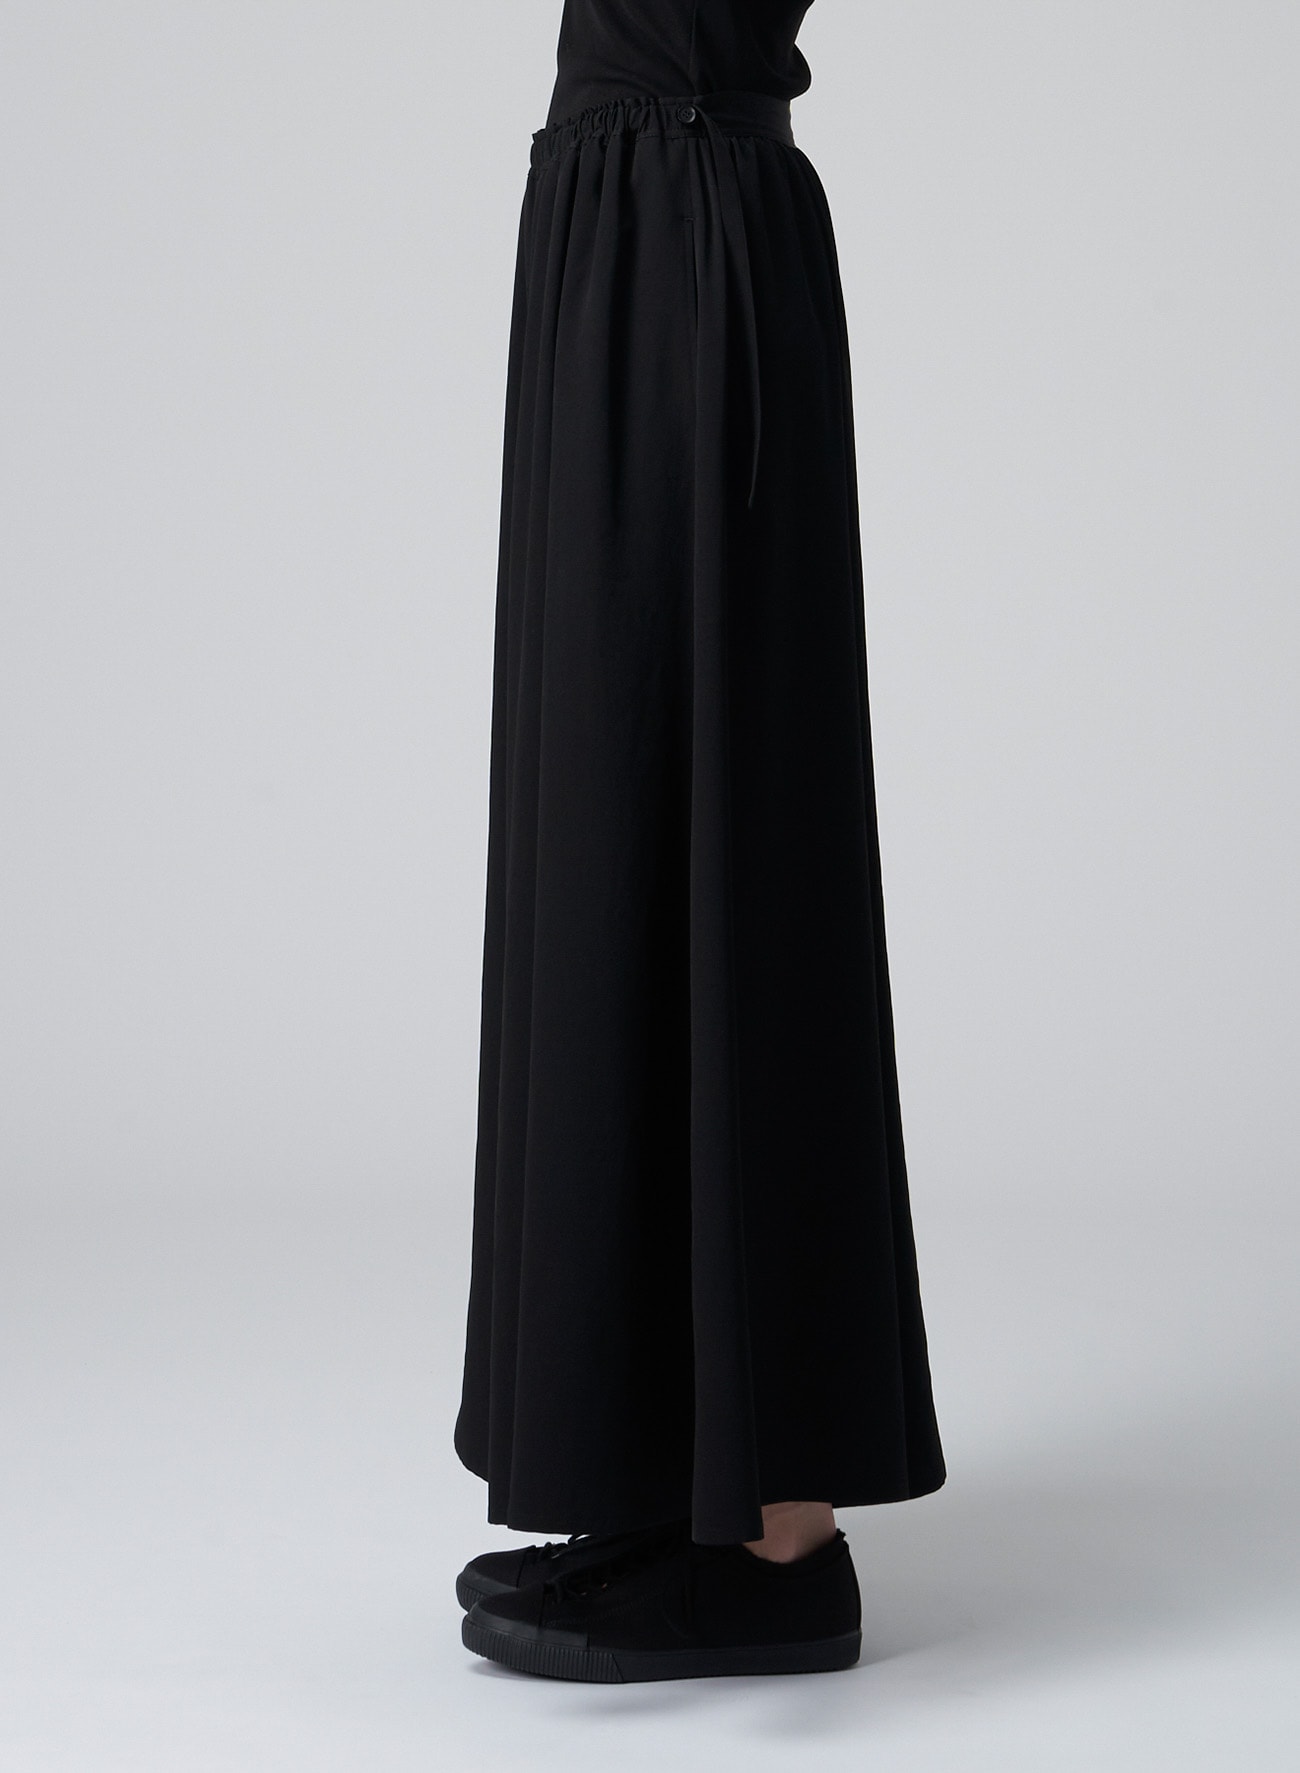 TRIACETATE/POLYESTER DE CHINE PANTS WITH GATHERED WAIST